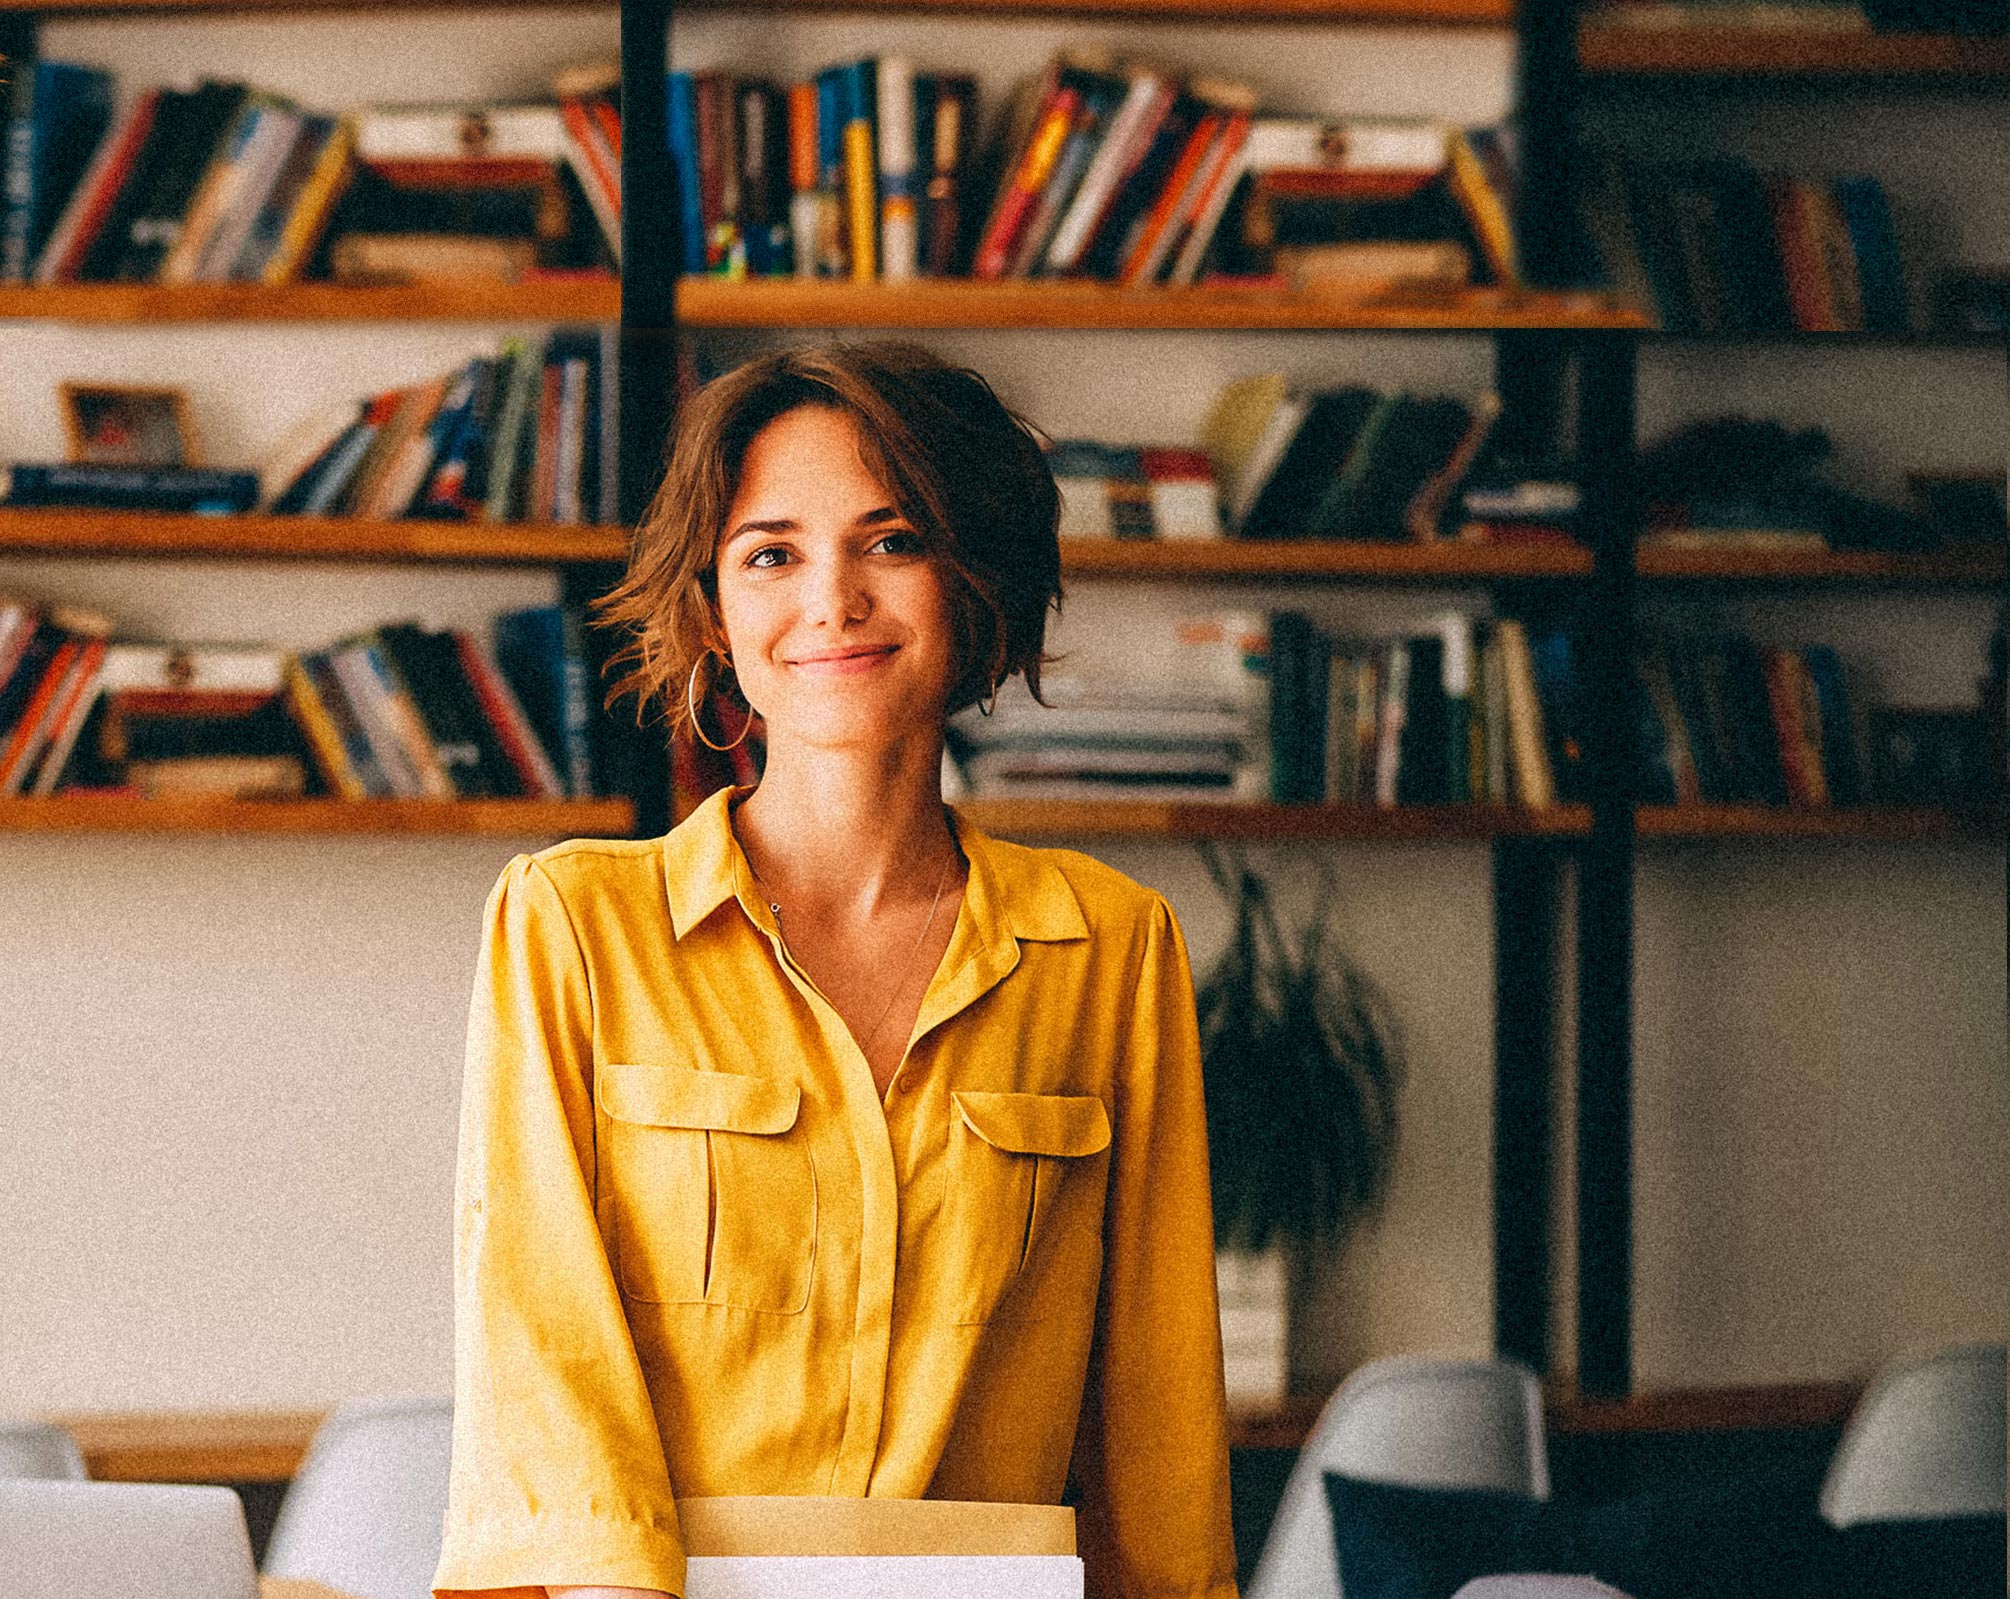 Smiling business woman in her office wearing a yellow shirt